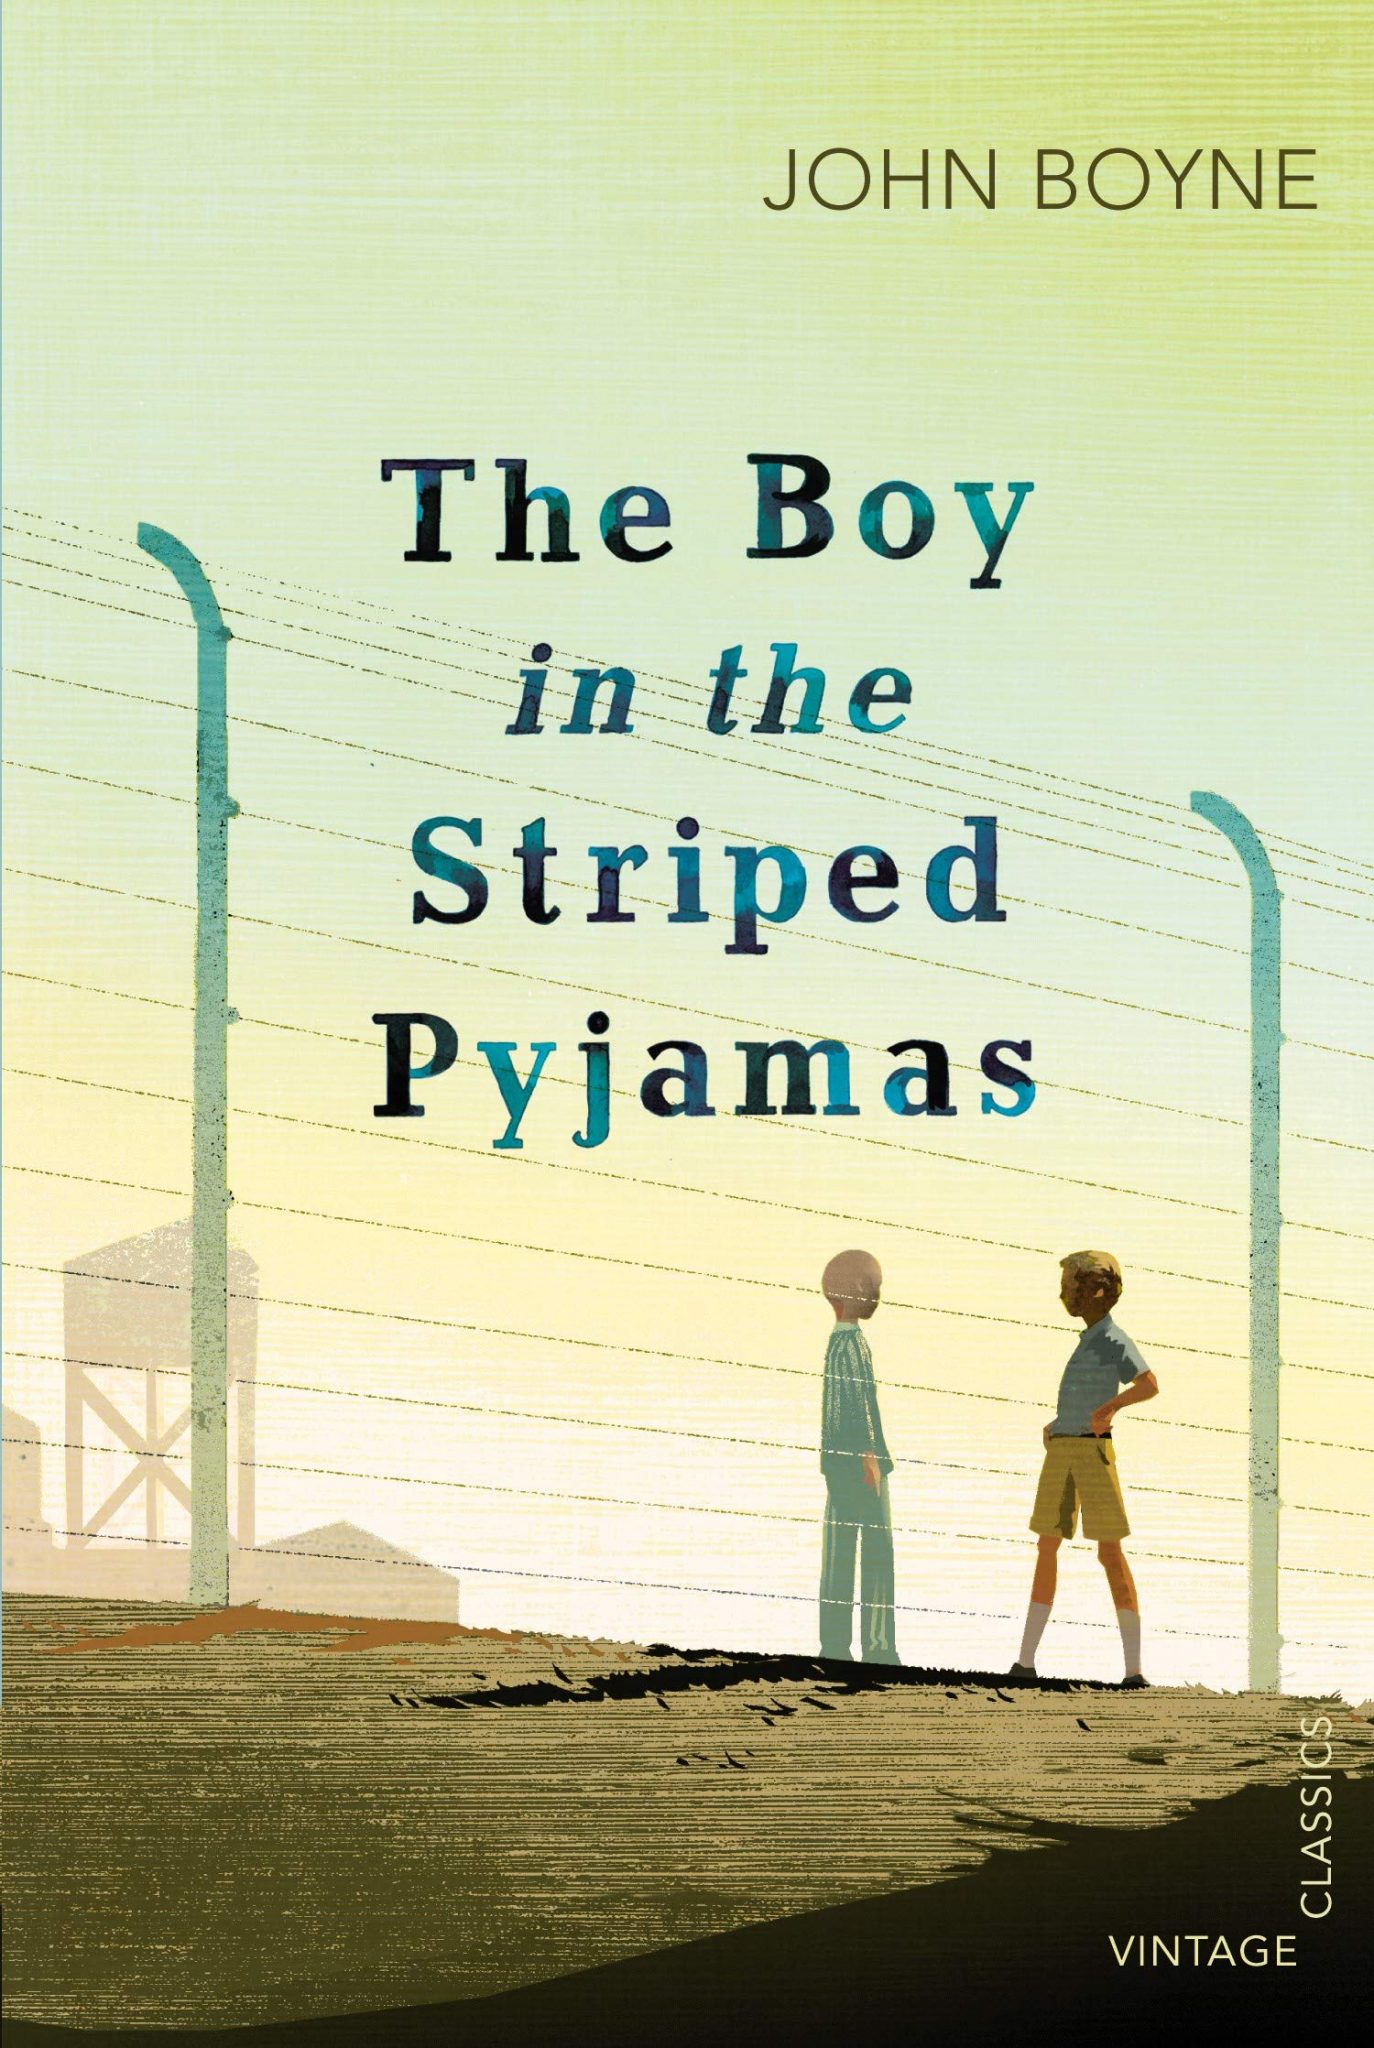 book review of boy in the striped pyjamas